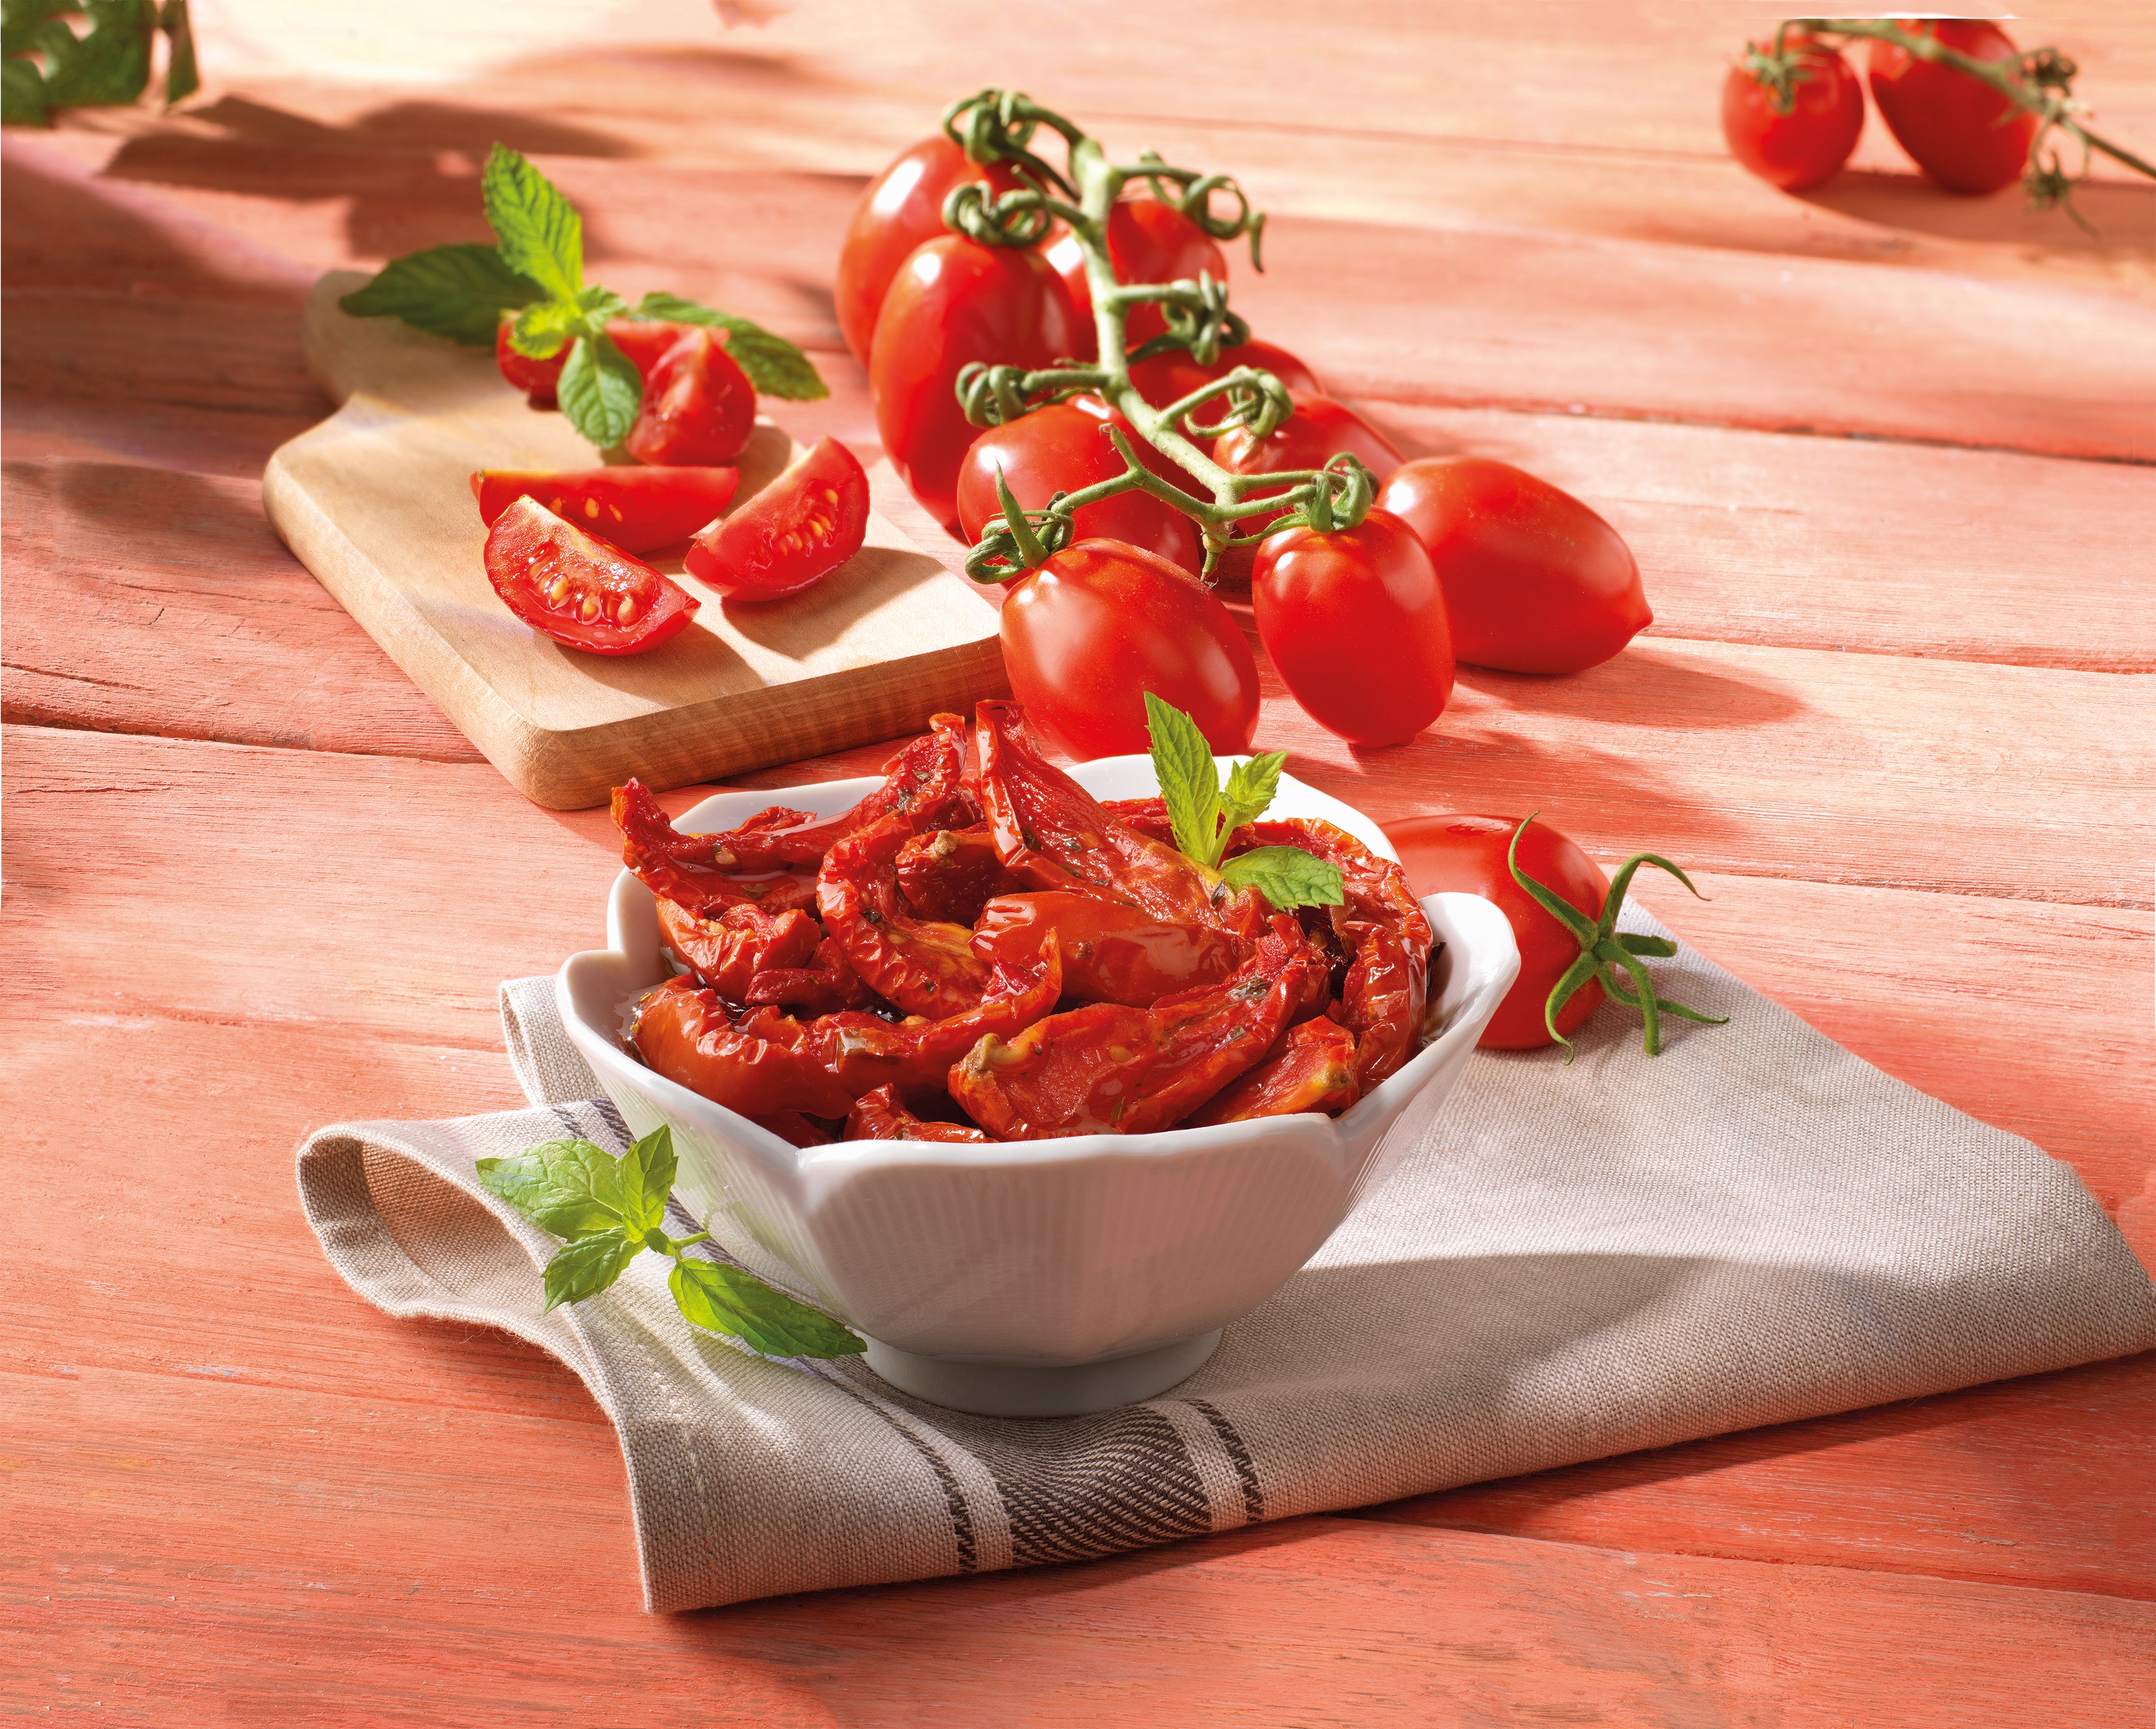 7 Delicious Ways To Use Rustic Semi-Dried Tomatoes